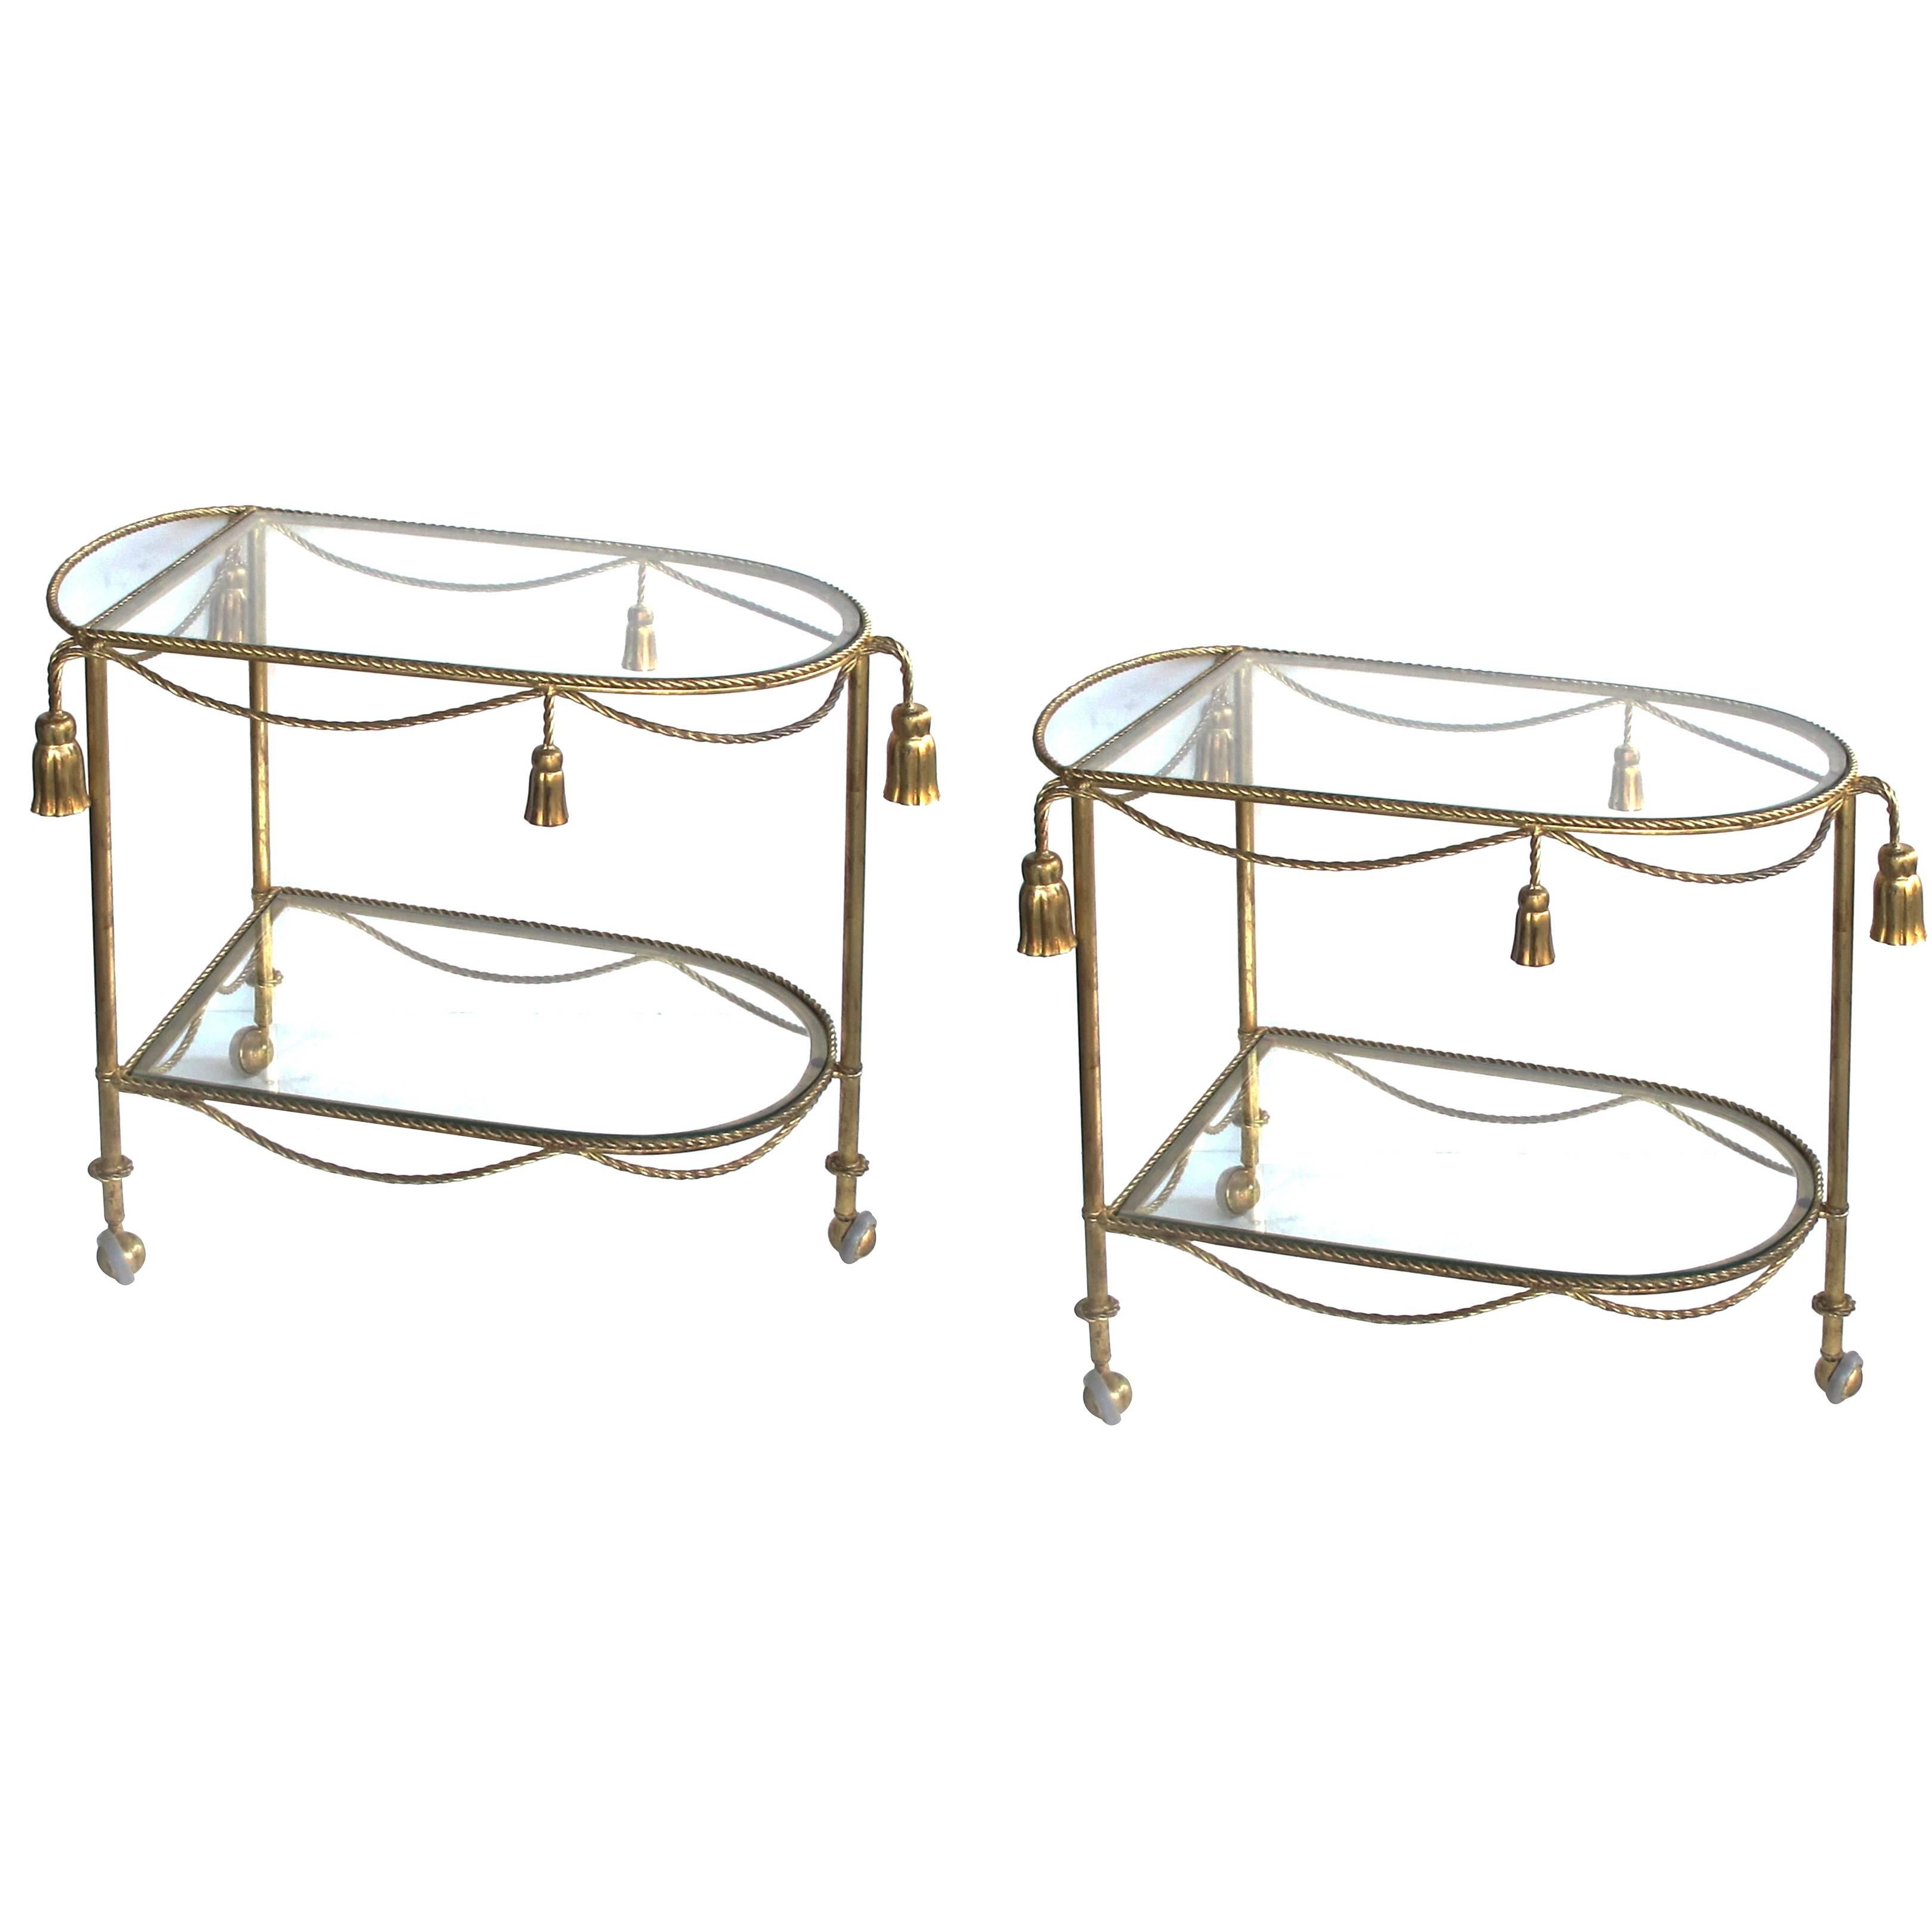 Chic Pair of Italian Hollywood Regency Gilt-Tole Drinks Carts with Glass Shelves